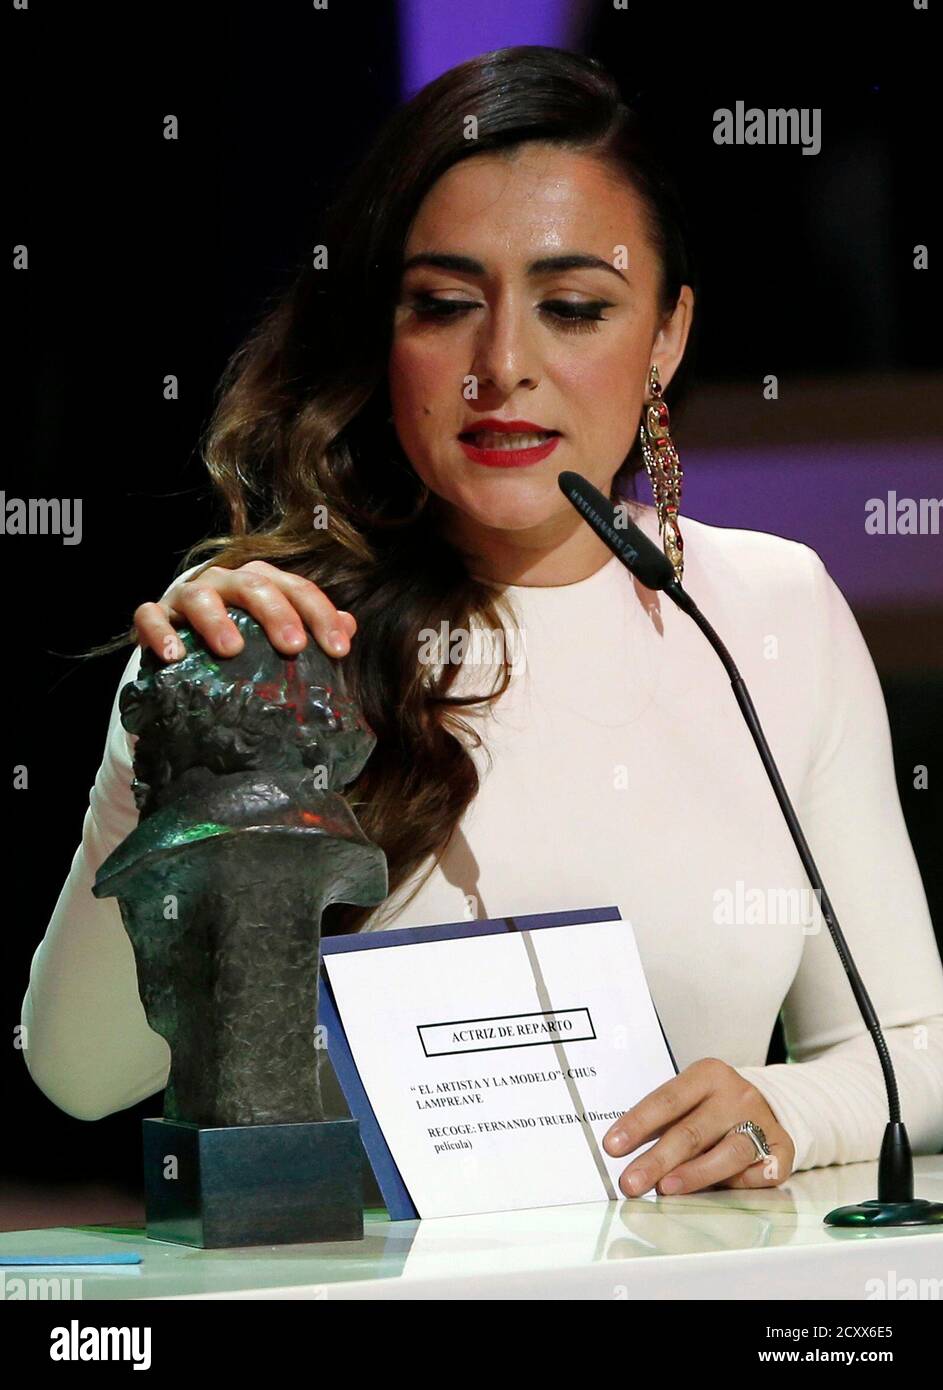 Candela Pena speaks as she receives her award for Best Supporting Actress  during the Spanish Film Academy's Goya awards ceremony in Madrid February  17, 2013. Picture taken February 17, 2013. REUTERS/Juan Medina (